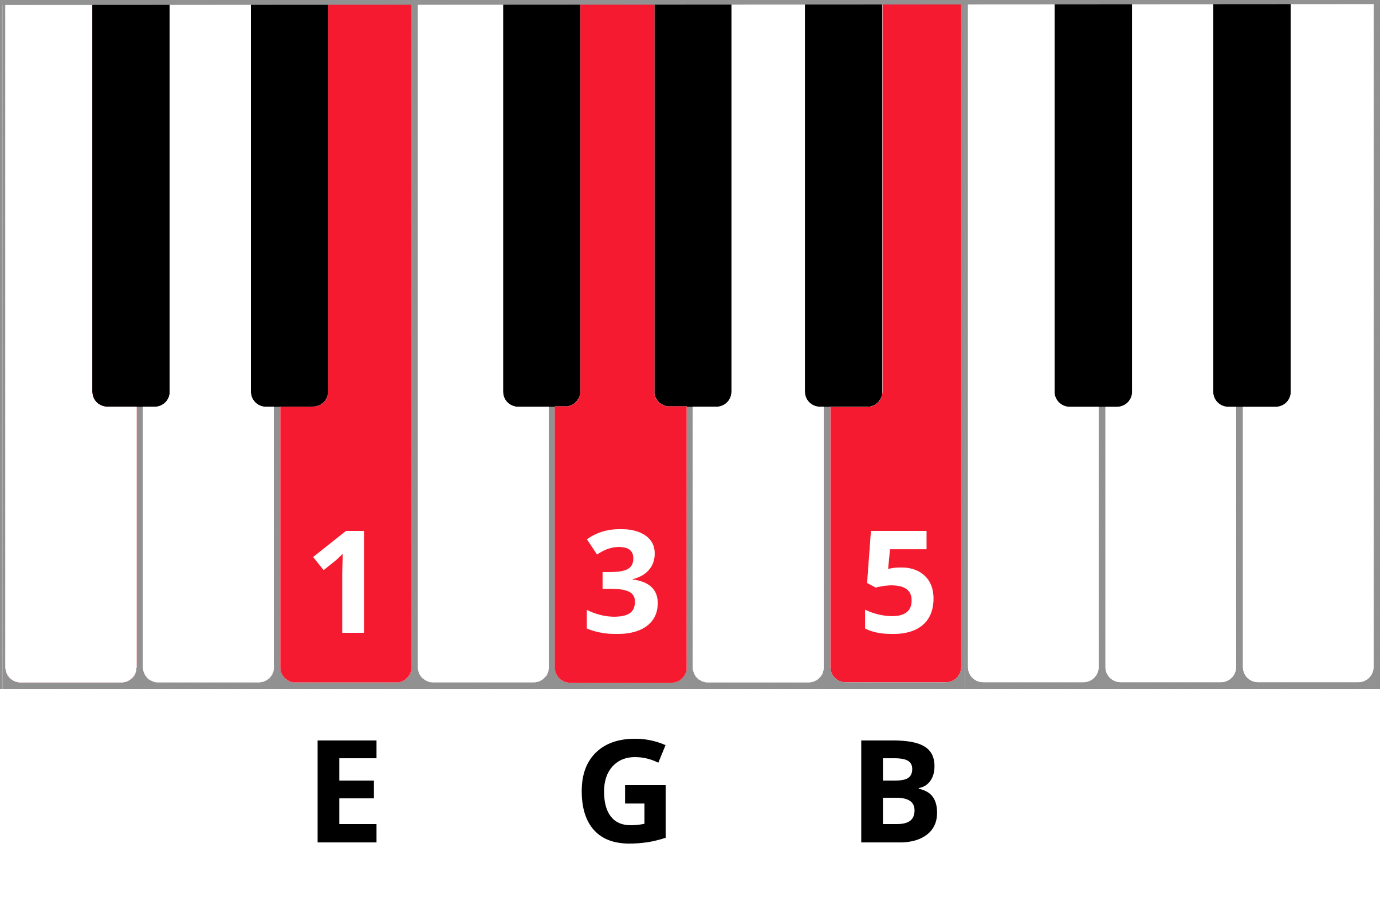 EGB chord highlighted in red on keyboard diagram with fingering 135.